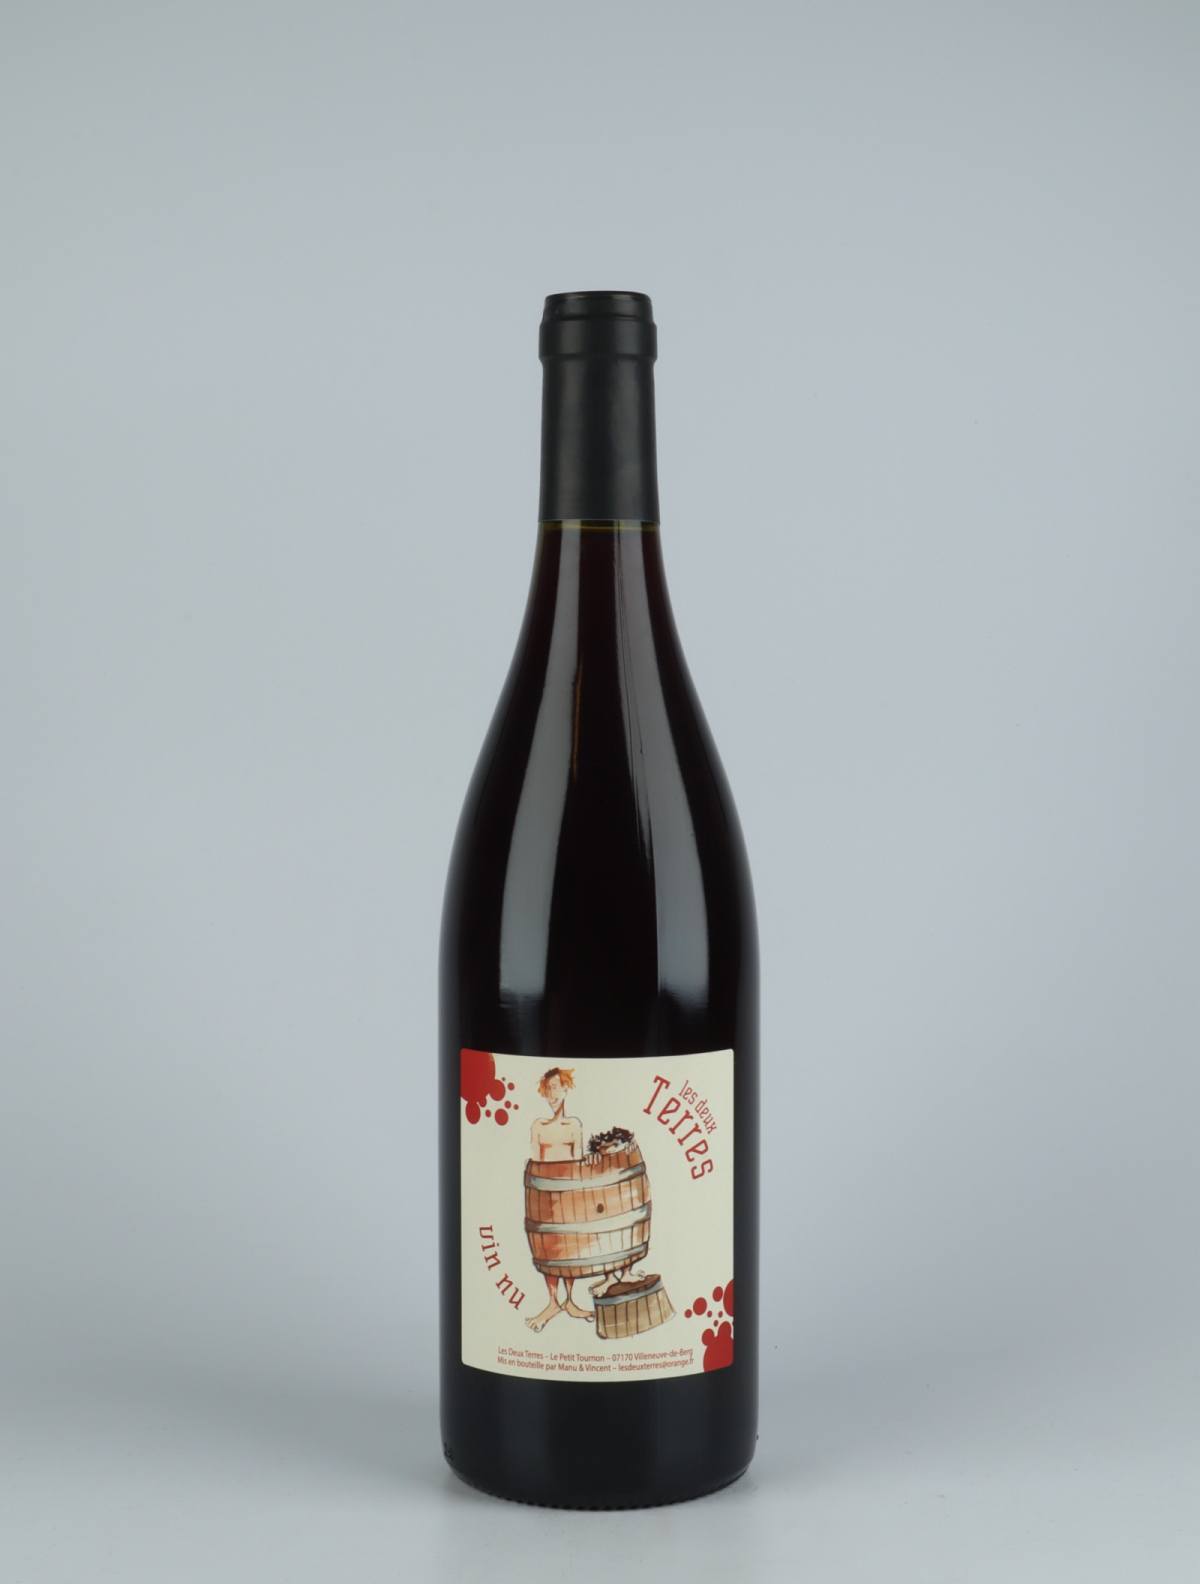 A bottle 2020 Vin Nu Rouge Red wine from Les Deux Terres, Ardèche in France